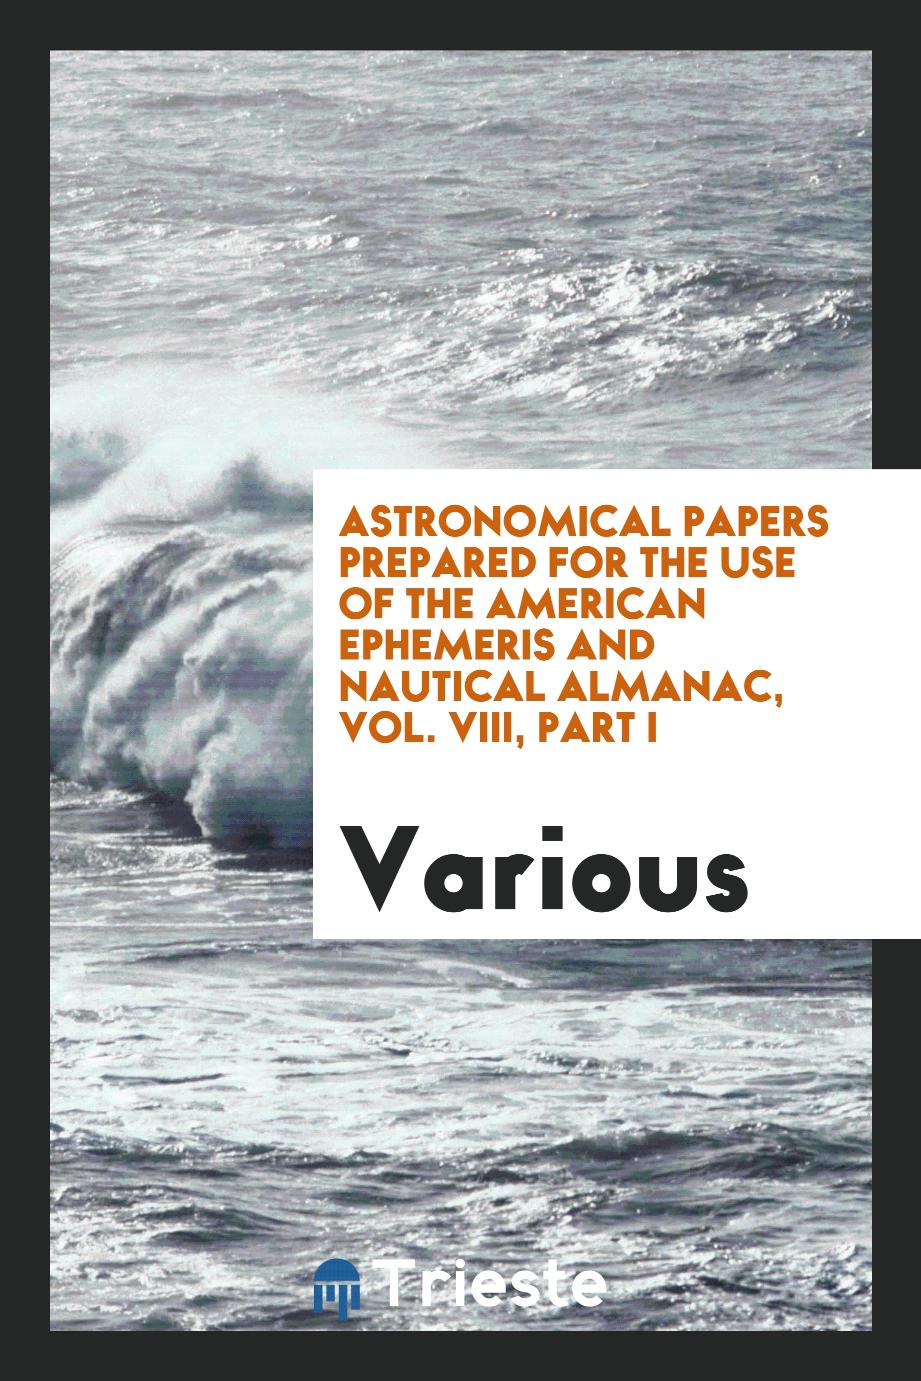 Astronomical Papers Prepared for the Use of the American Ephemeris and Nautical Almanac, Vol. VIII, Part I